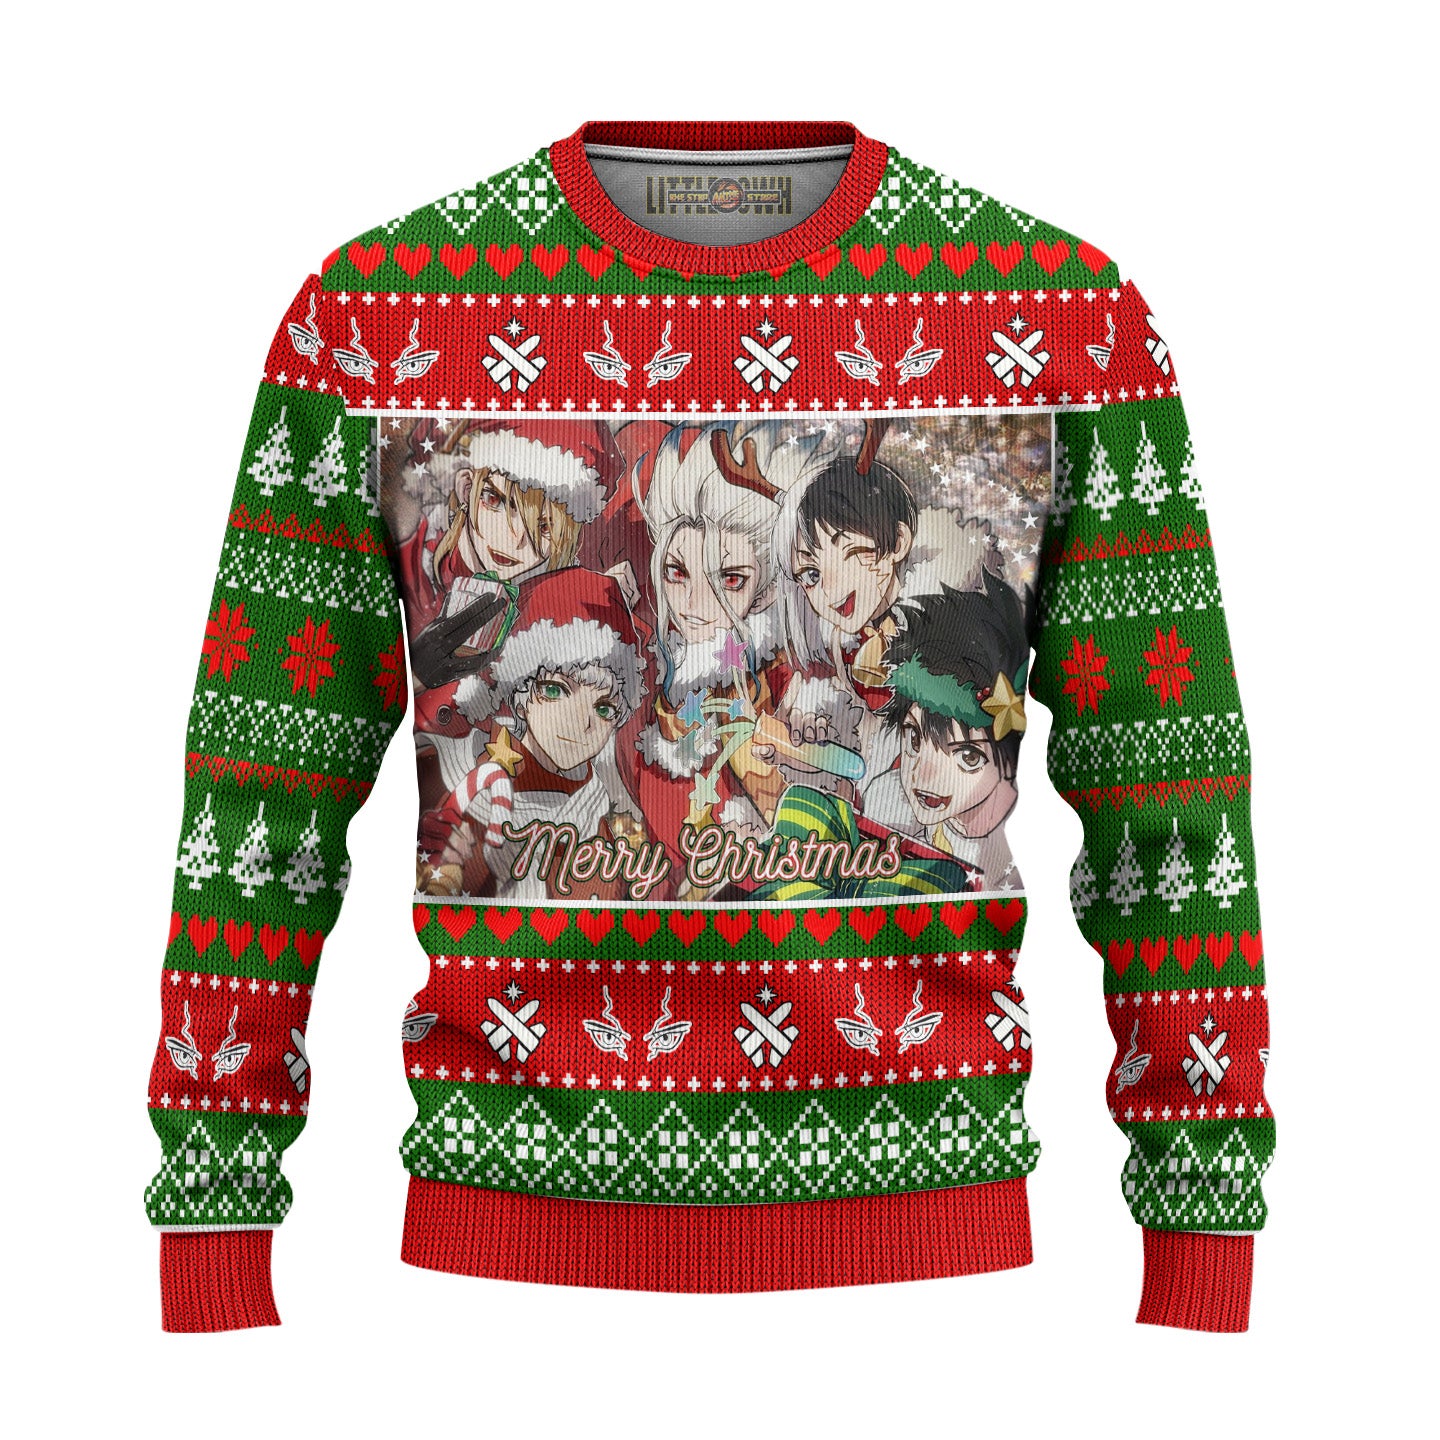 Dr_Stone_-_Dr_Stone_-_Ugly_Sweatshirt_Front_-_Littleowh.jpg